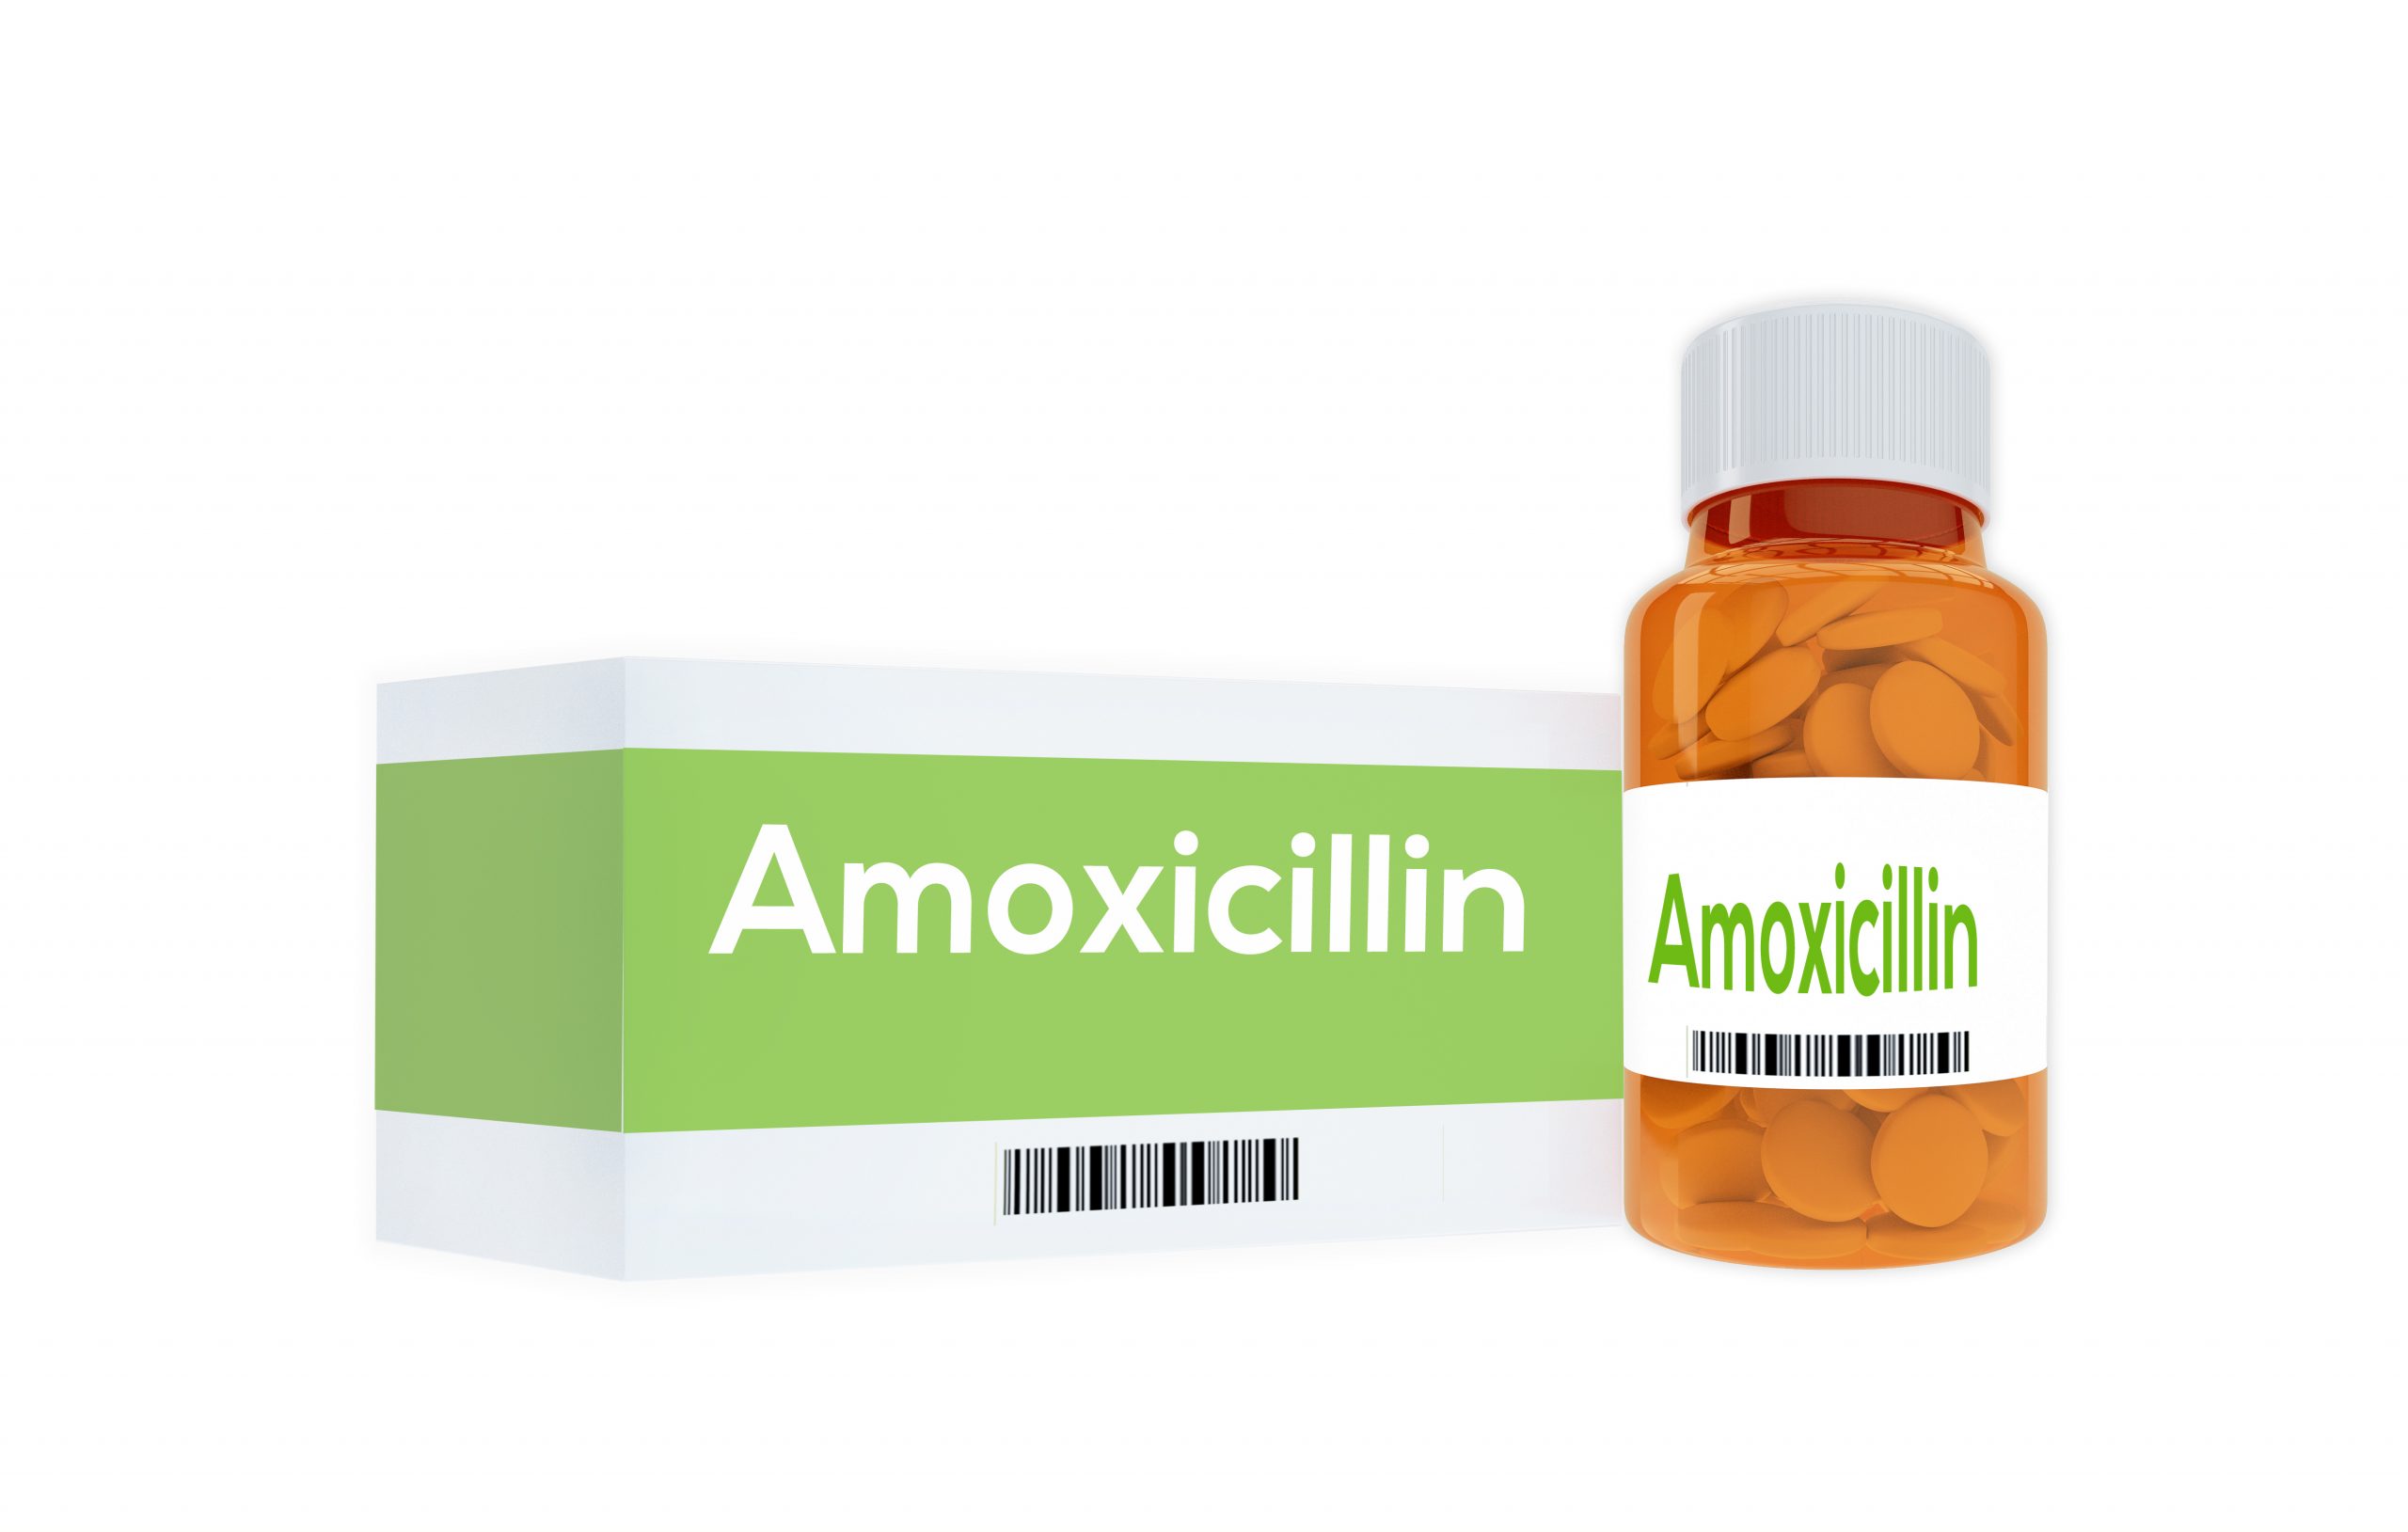 Is There Really a Shortage of Amoxicillin?